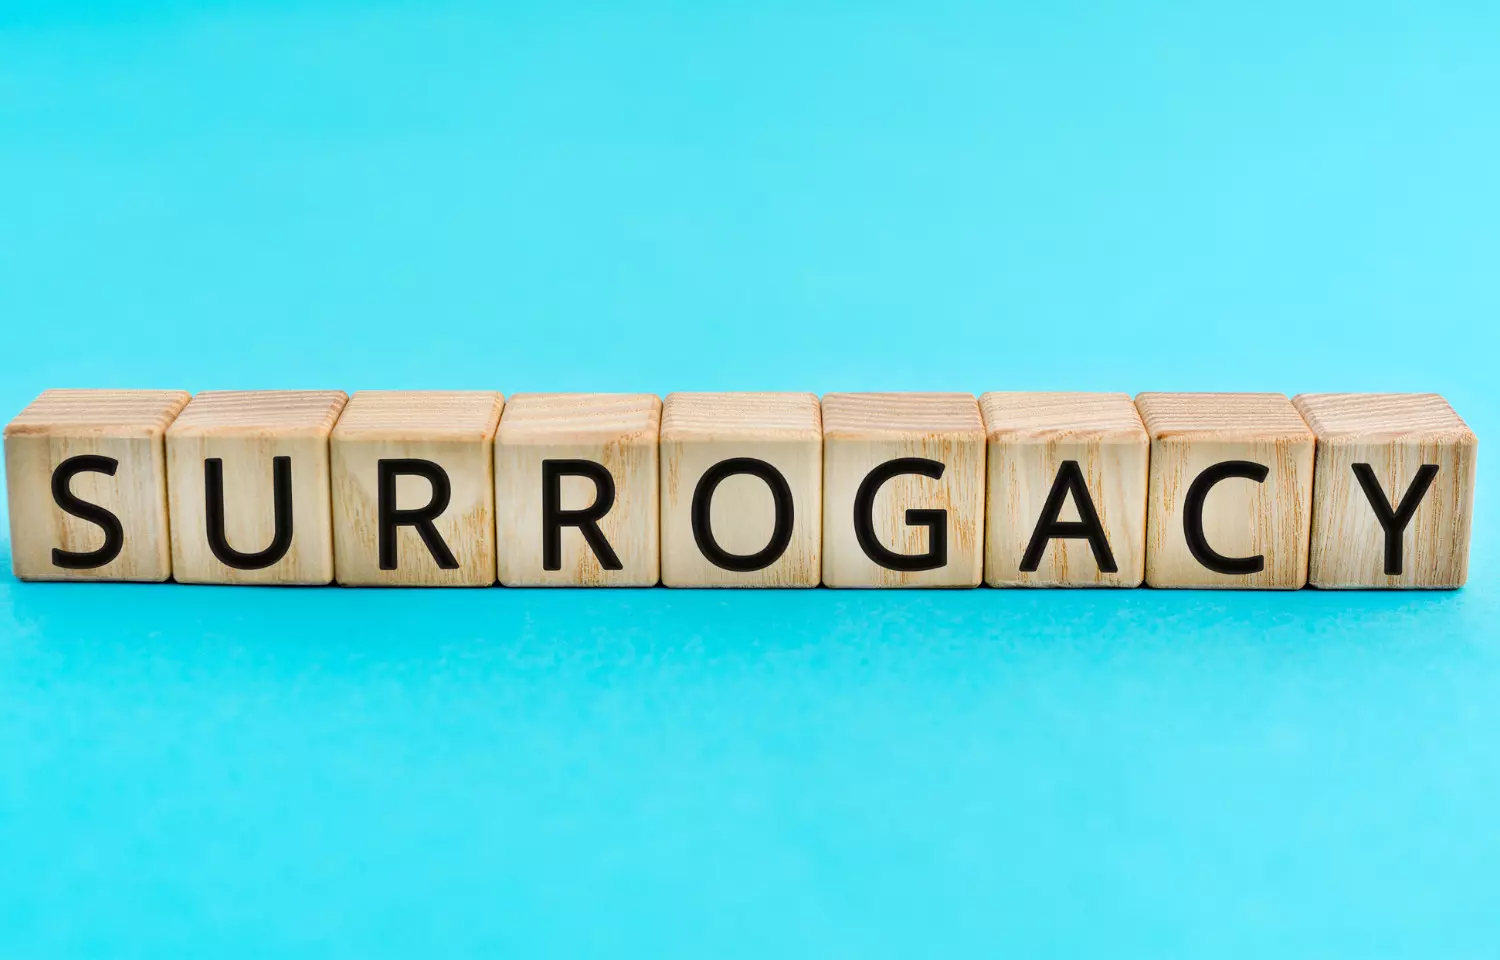 Telangana: Govt sets up panel to regulate Surrogacy, Assisted Reproduction